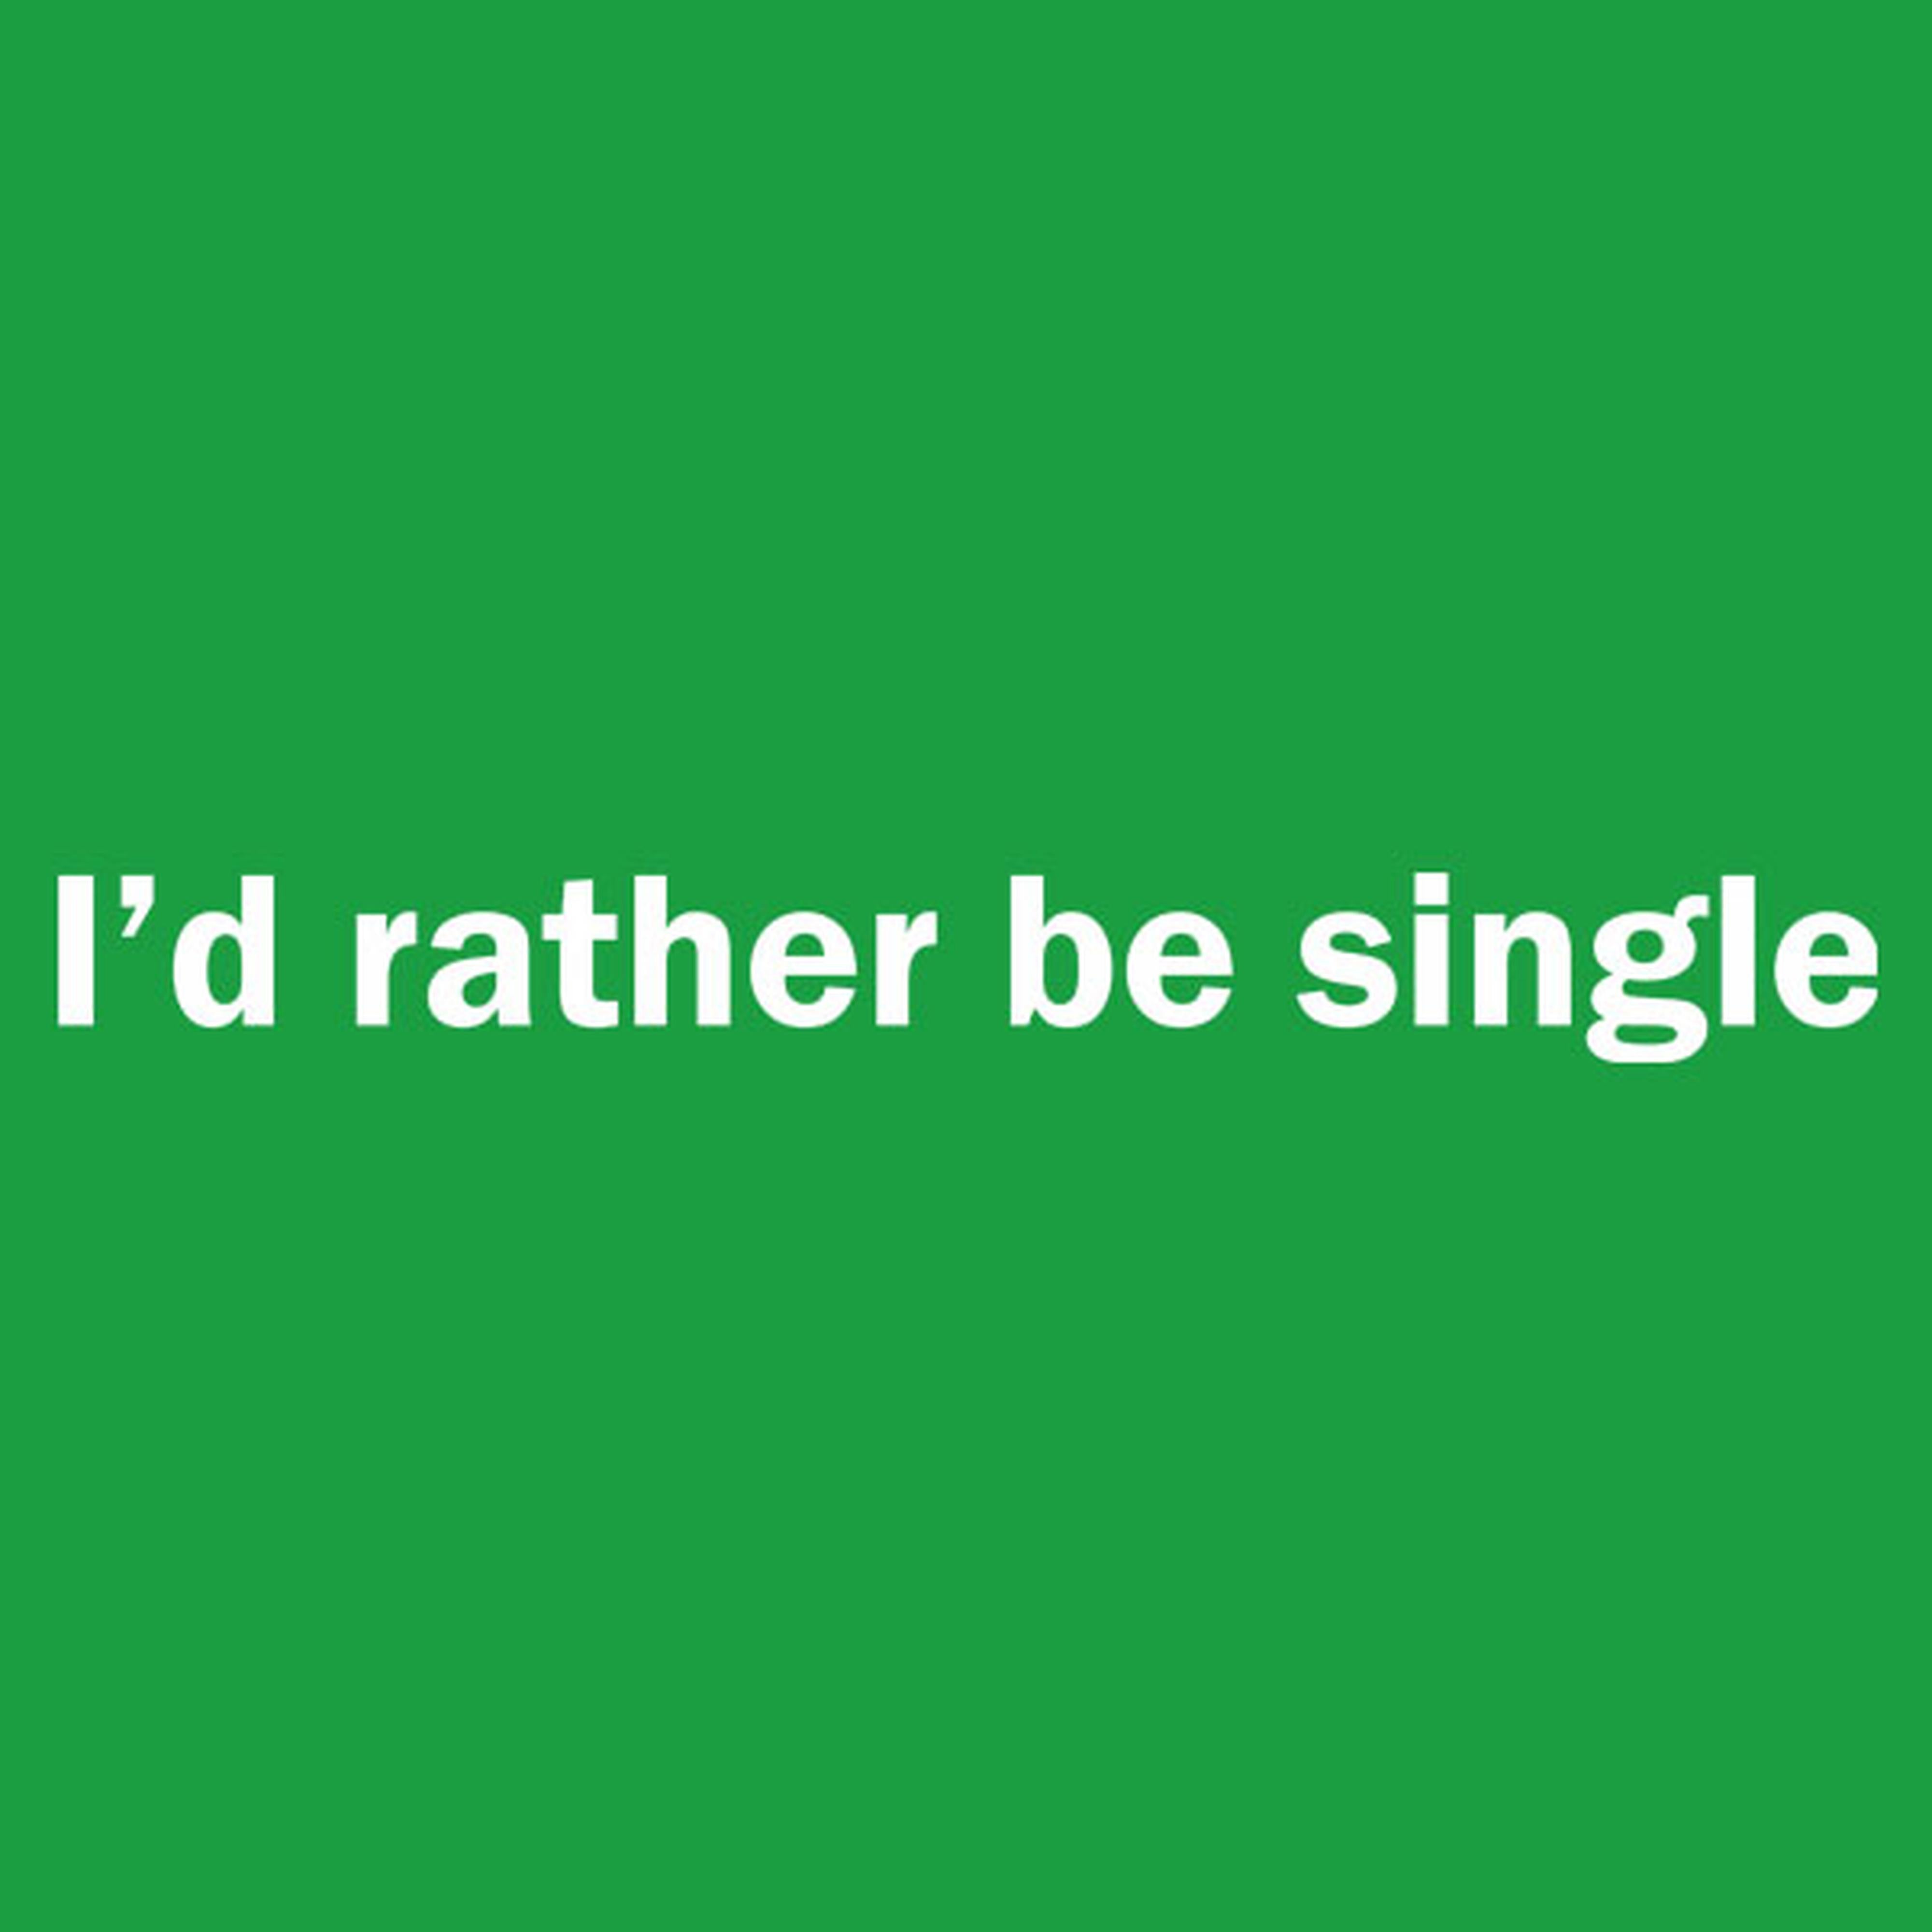 I'd rather be single